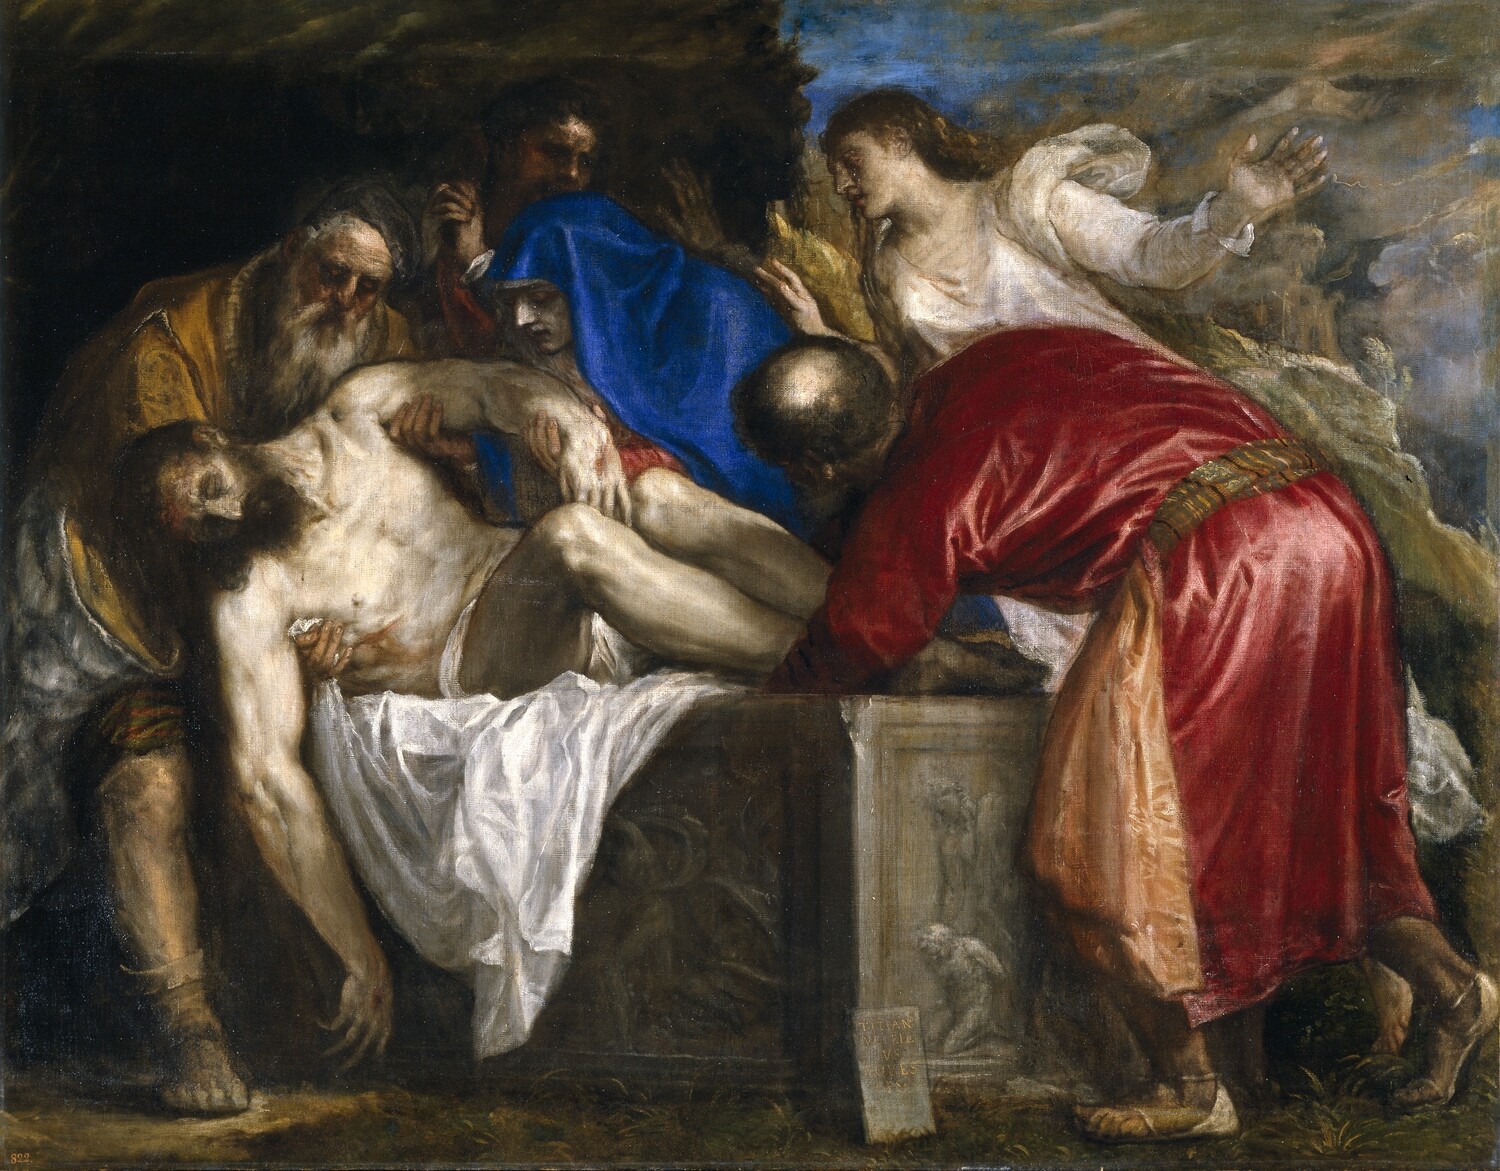 Christ in the tomb